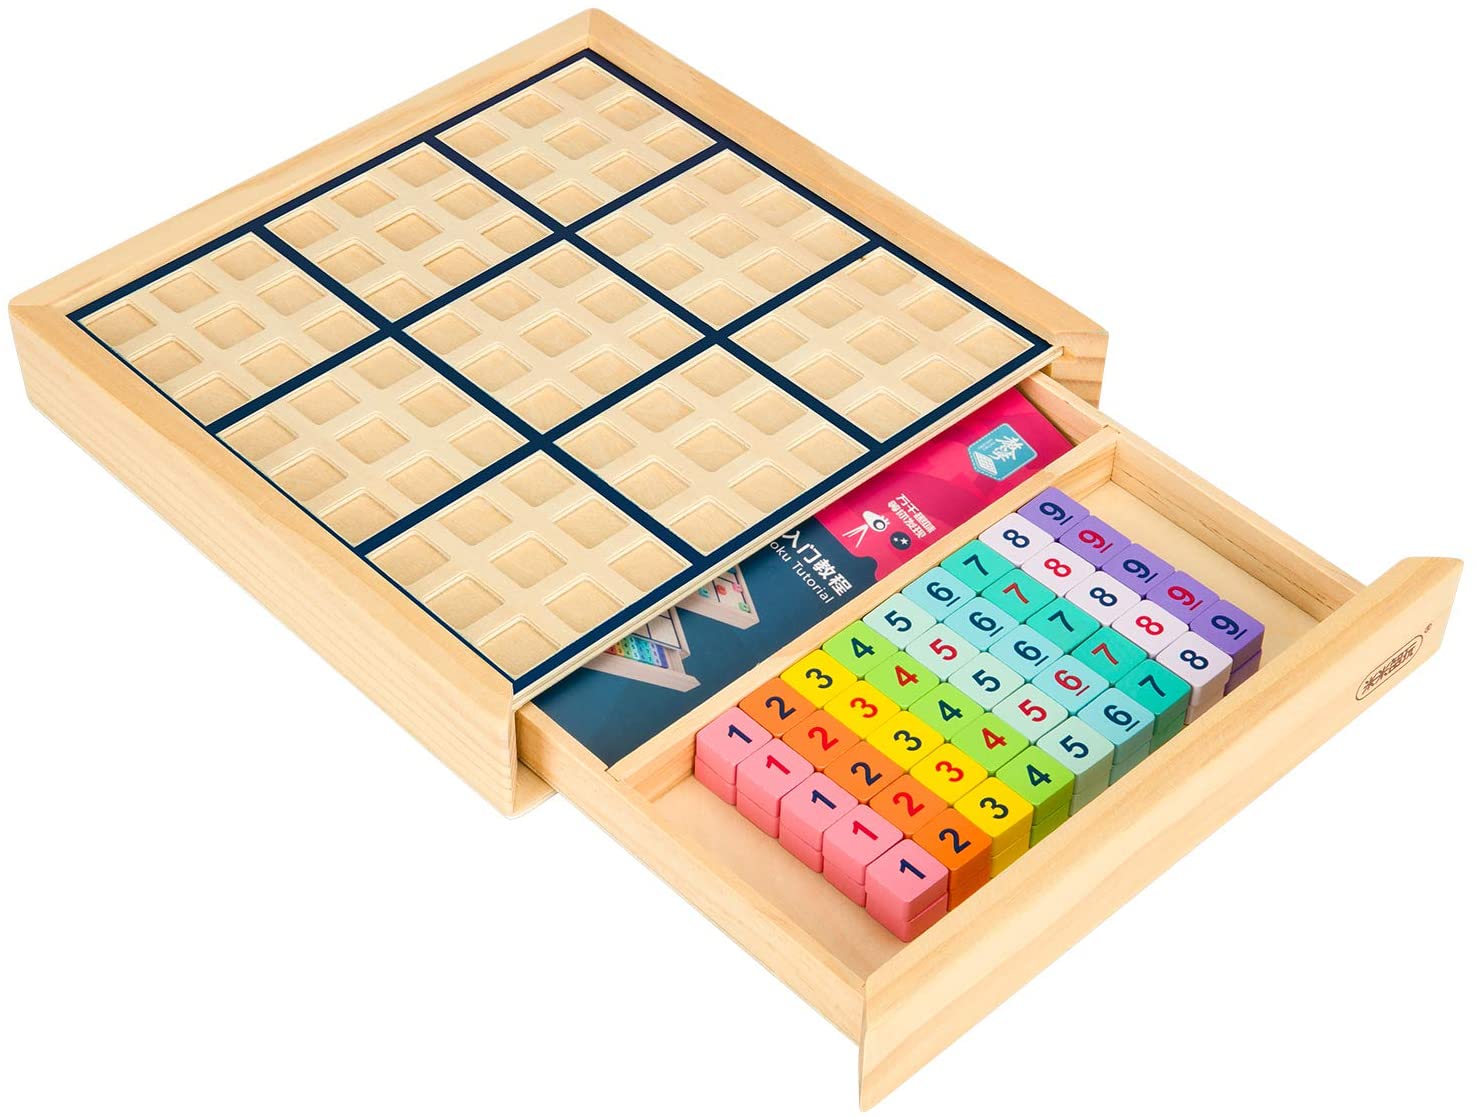 Math Brain Teaser Desktop Toys Teasers Children Educationa Logical Thinking Wooden Sudoku Board Game Chess with Number Tiles 